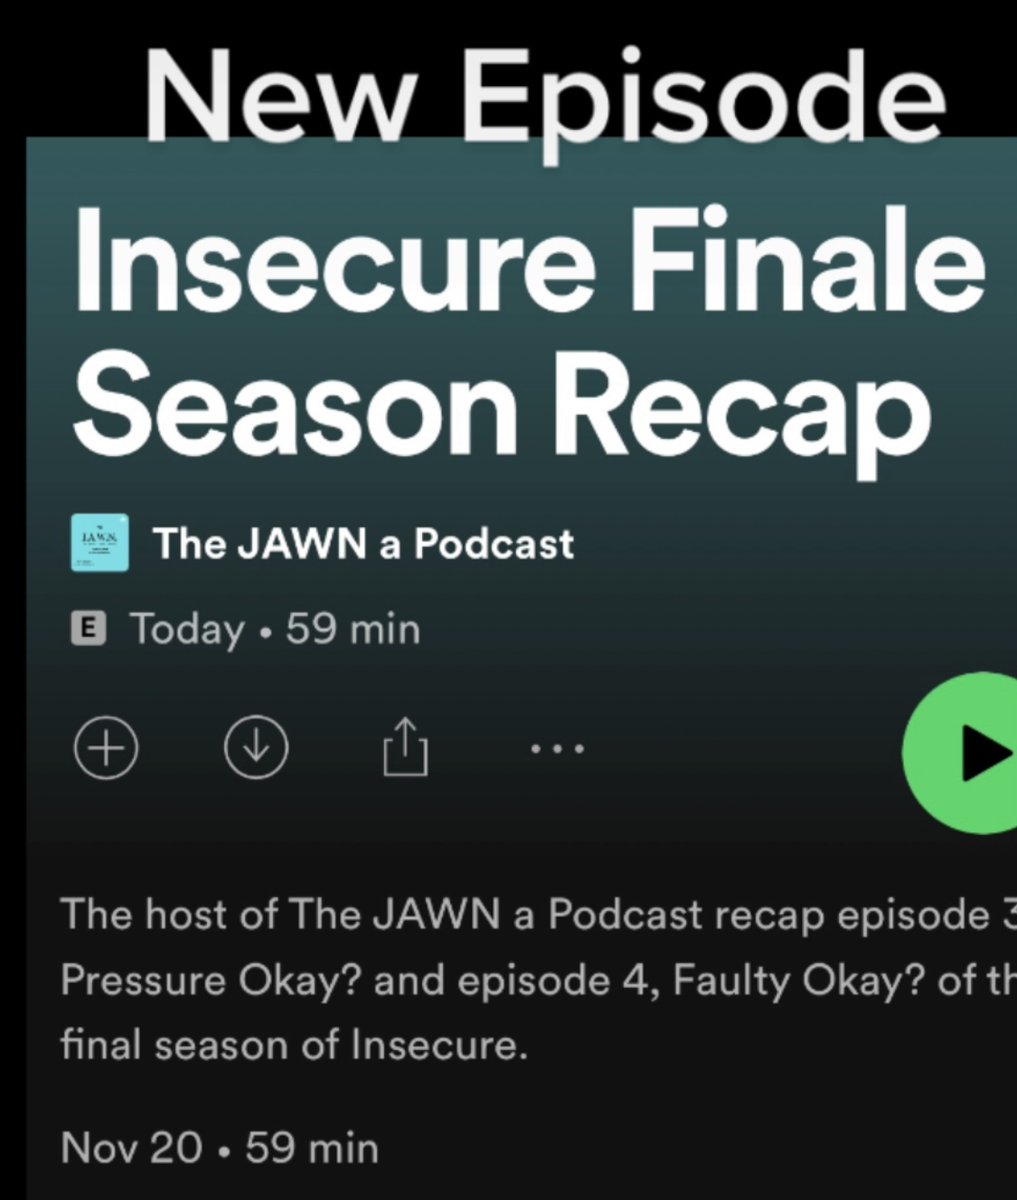 Listen on #apple #spotify #google and #anchor #TheJAWN #APodcast ##WelcomeToWomanhood #womenpodcasters #blackwomenpodcasters  #phillypodcast #atlpodcast